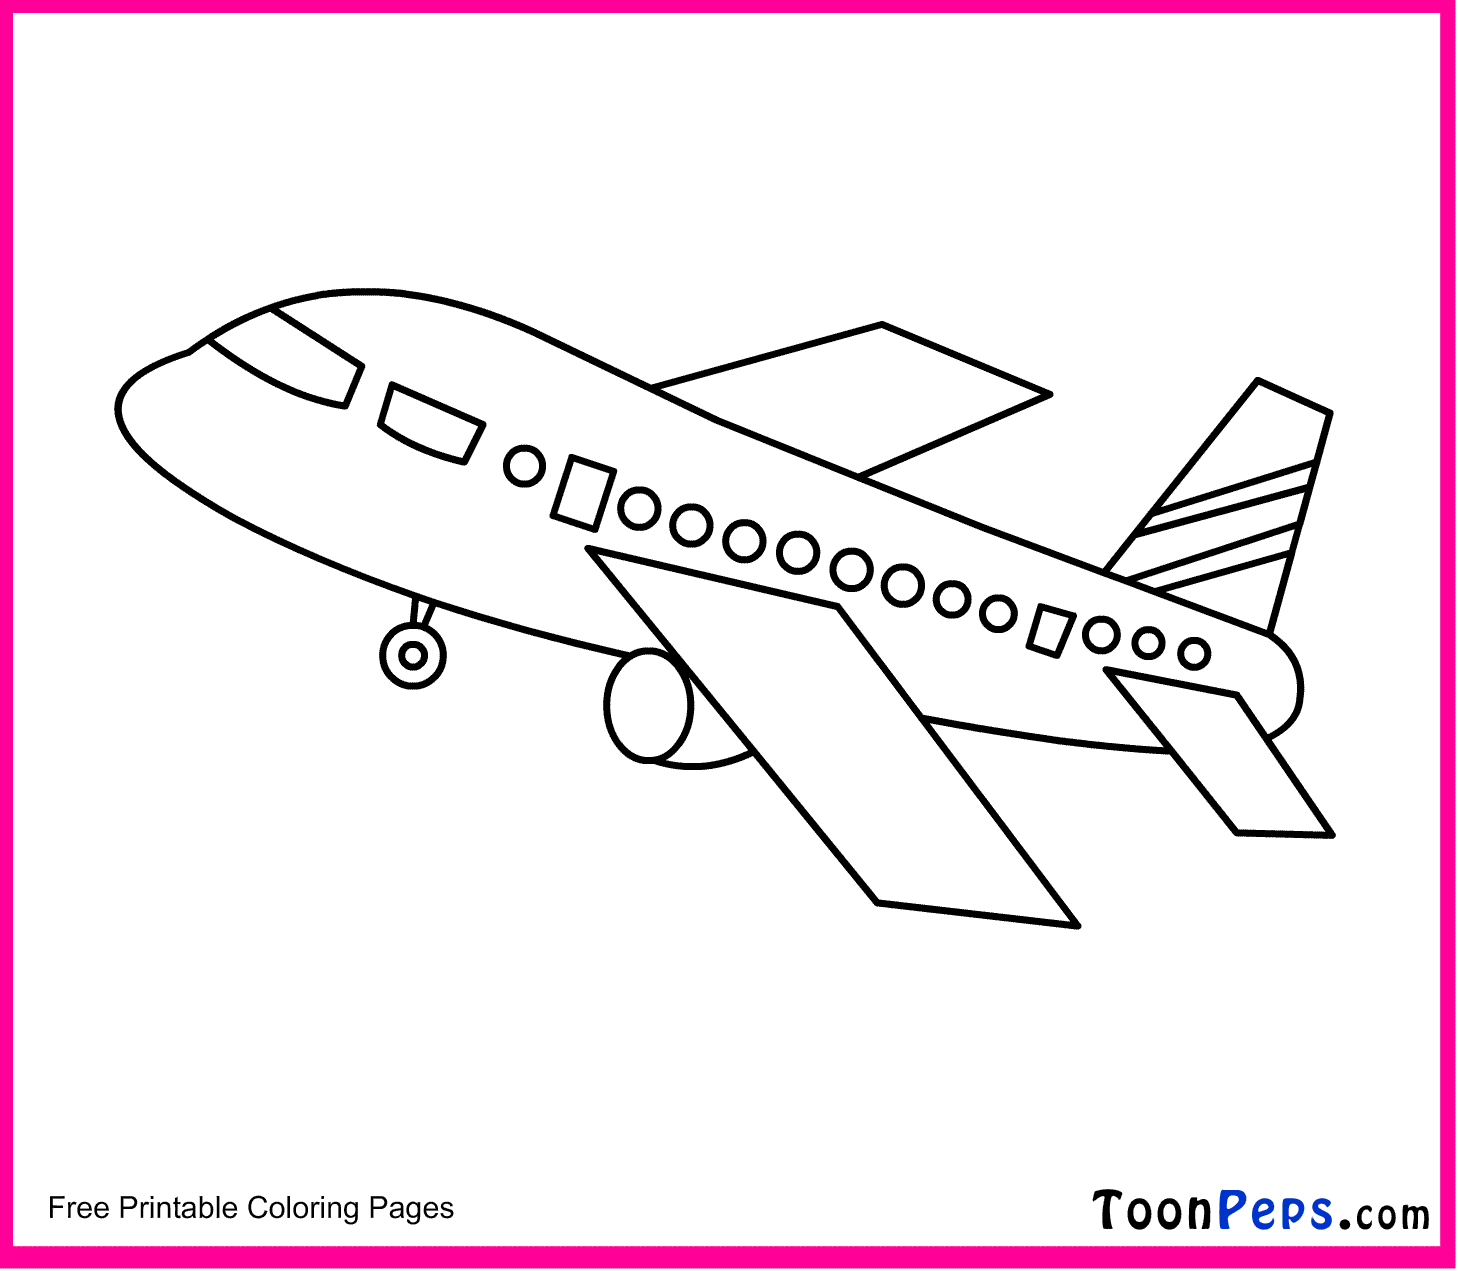 Toonpeps : Free Printable Airplane coloring pages for kids